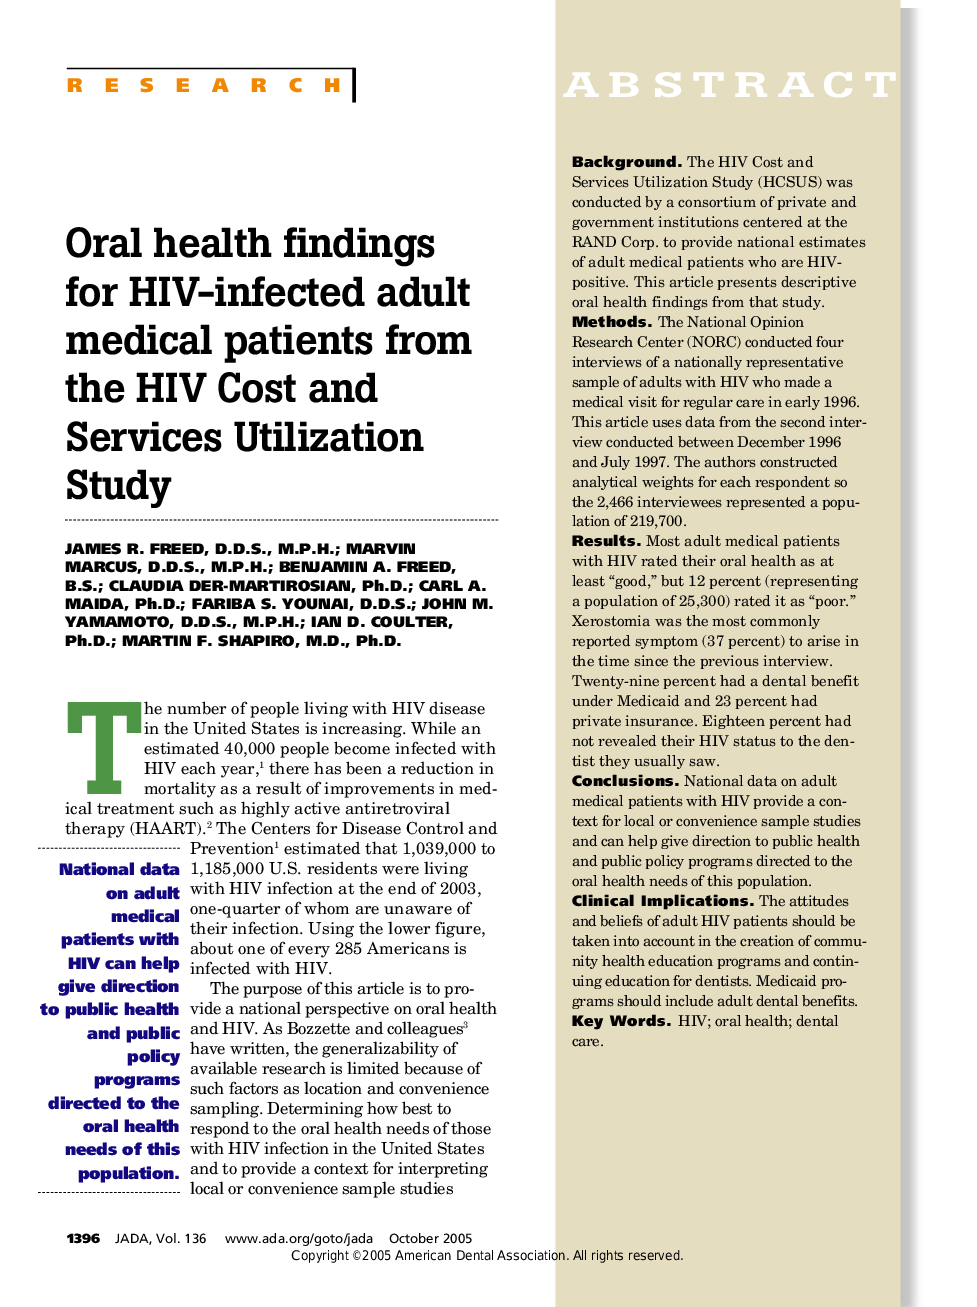 Oral health findings for HIV-infected adult medical patients from the HIV Cost and Services Utilization Study